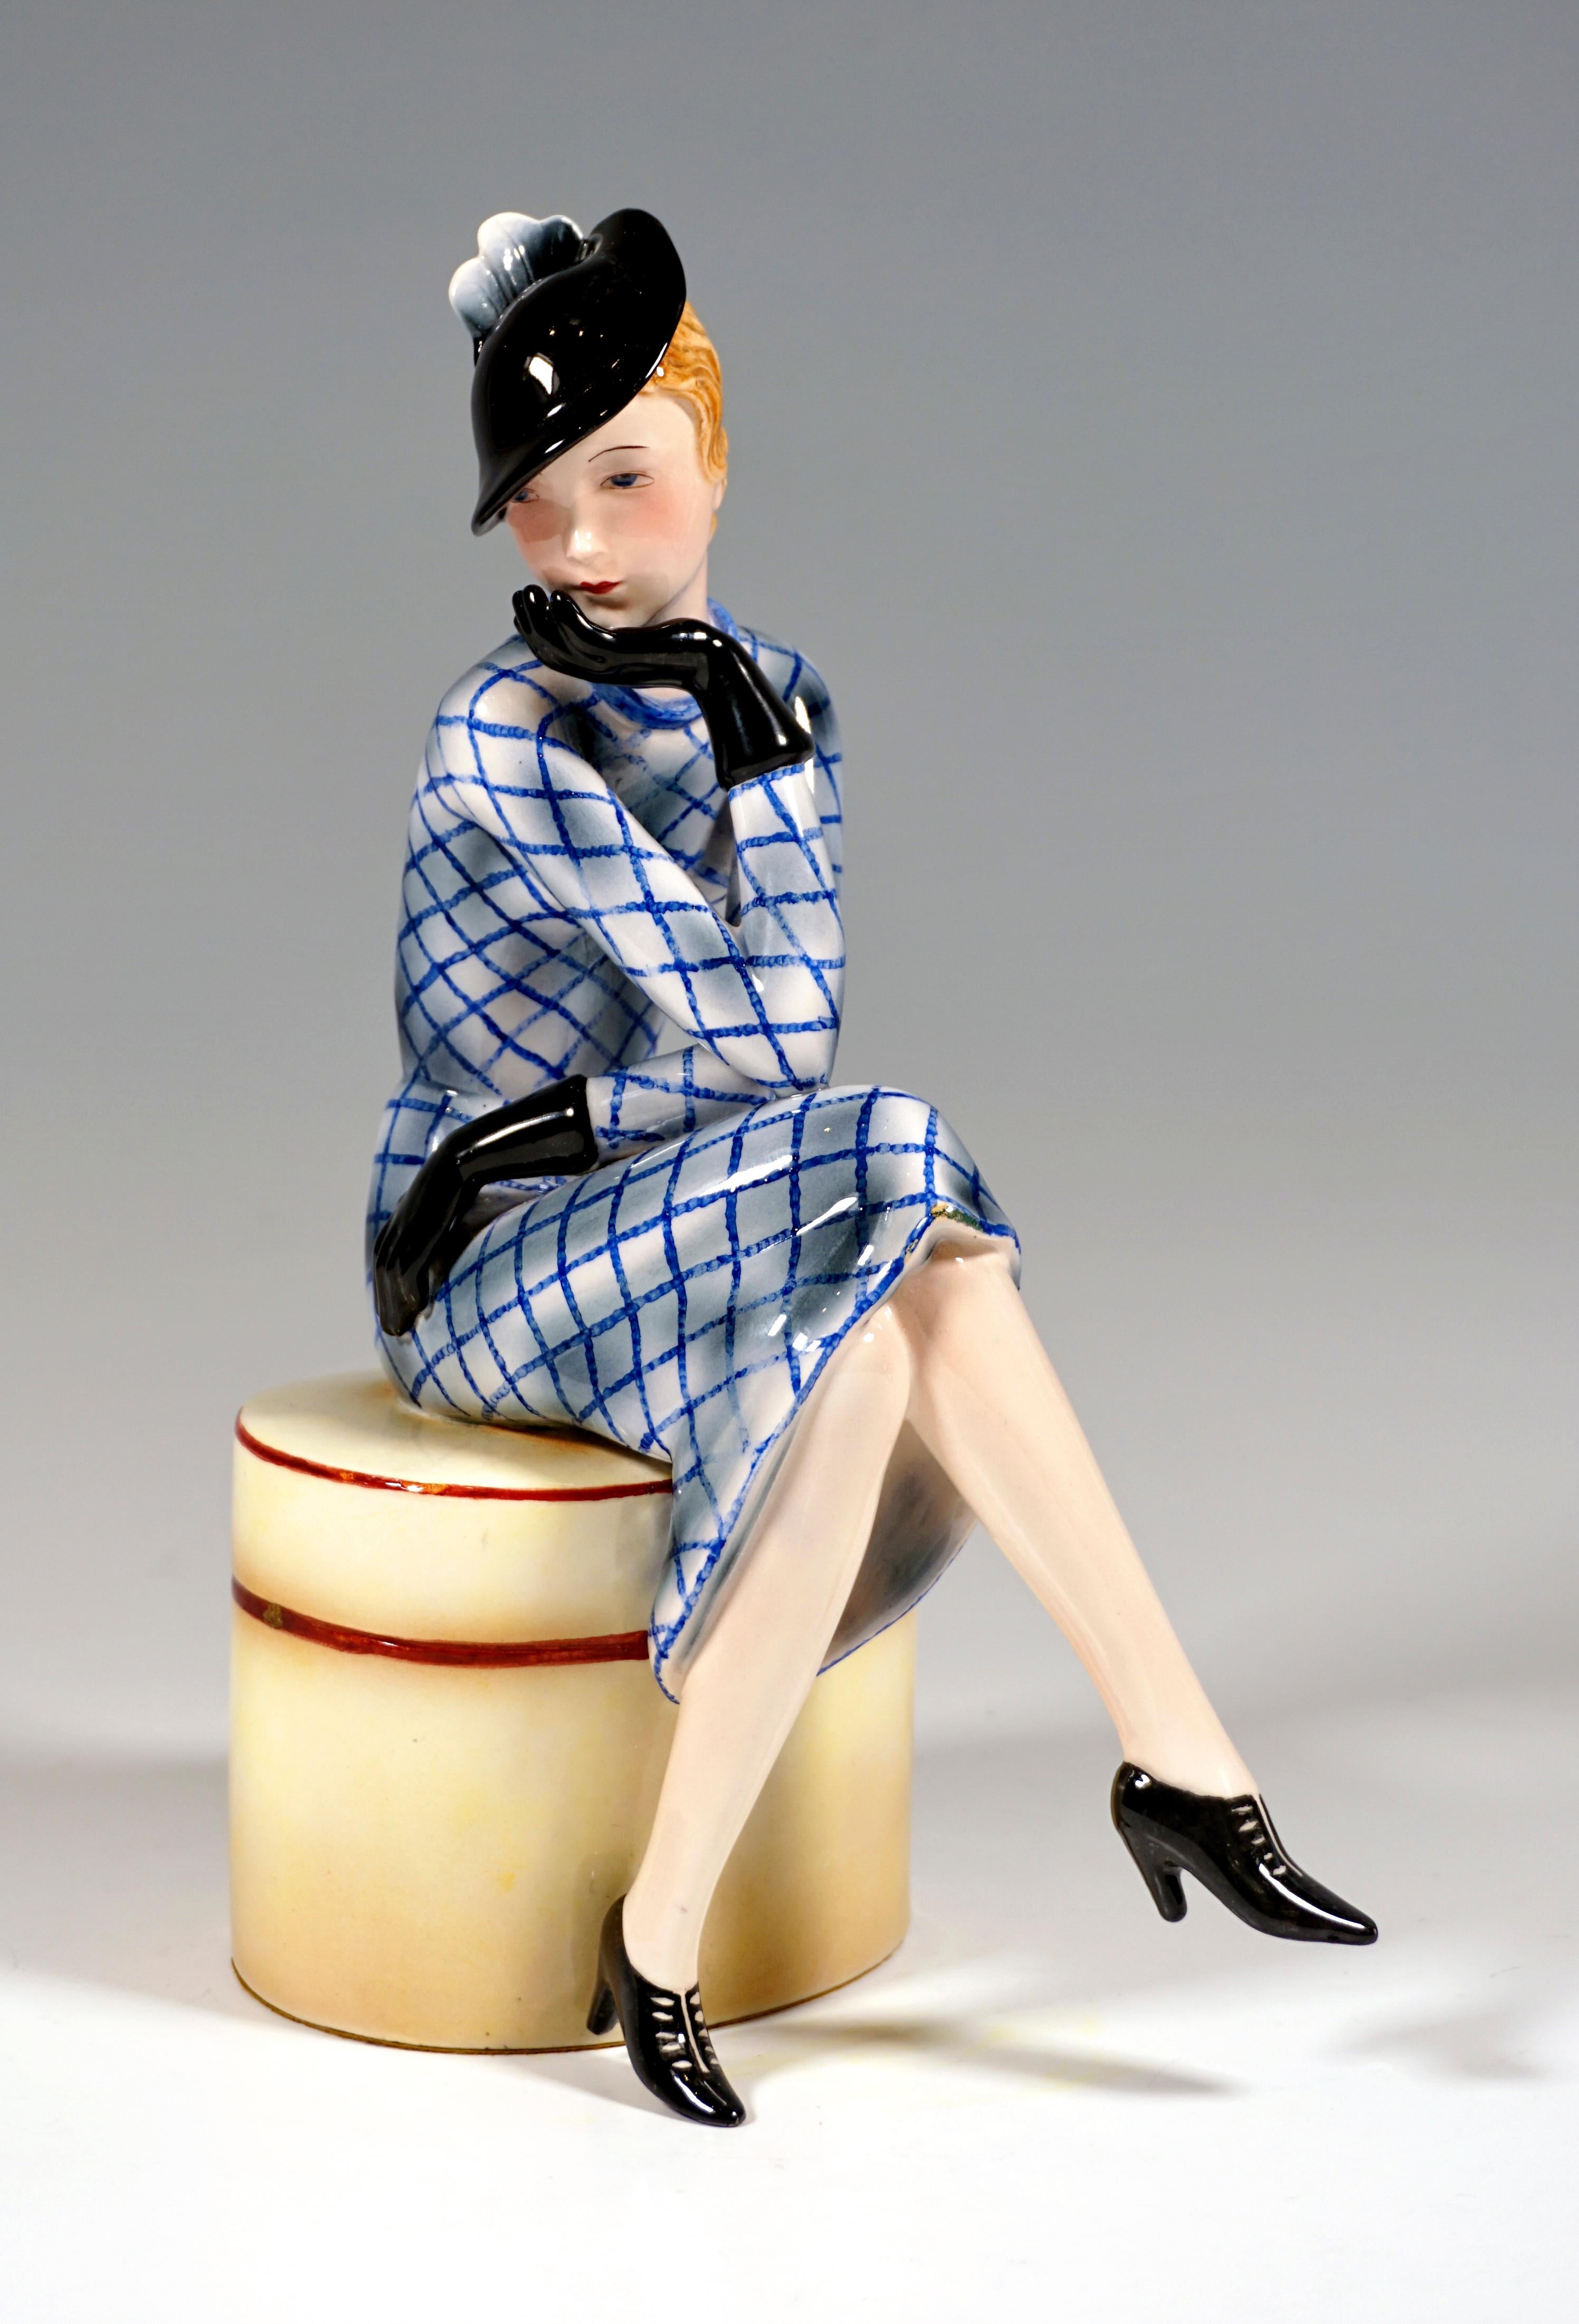 Very rare Goldscheider Art Deco Ceramic Figurine:
A young lady with red-blonde curly hair in an elegant, white-blue checked suit with a black hat, gloves and shoes sitting on a large, natural white hat box with dark red edges, crossed her legs,